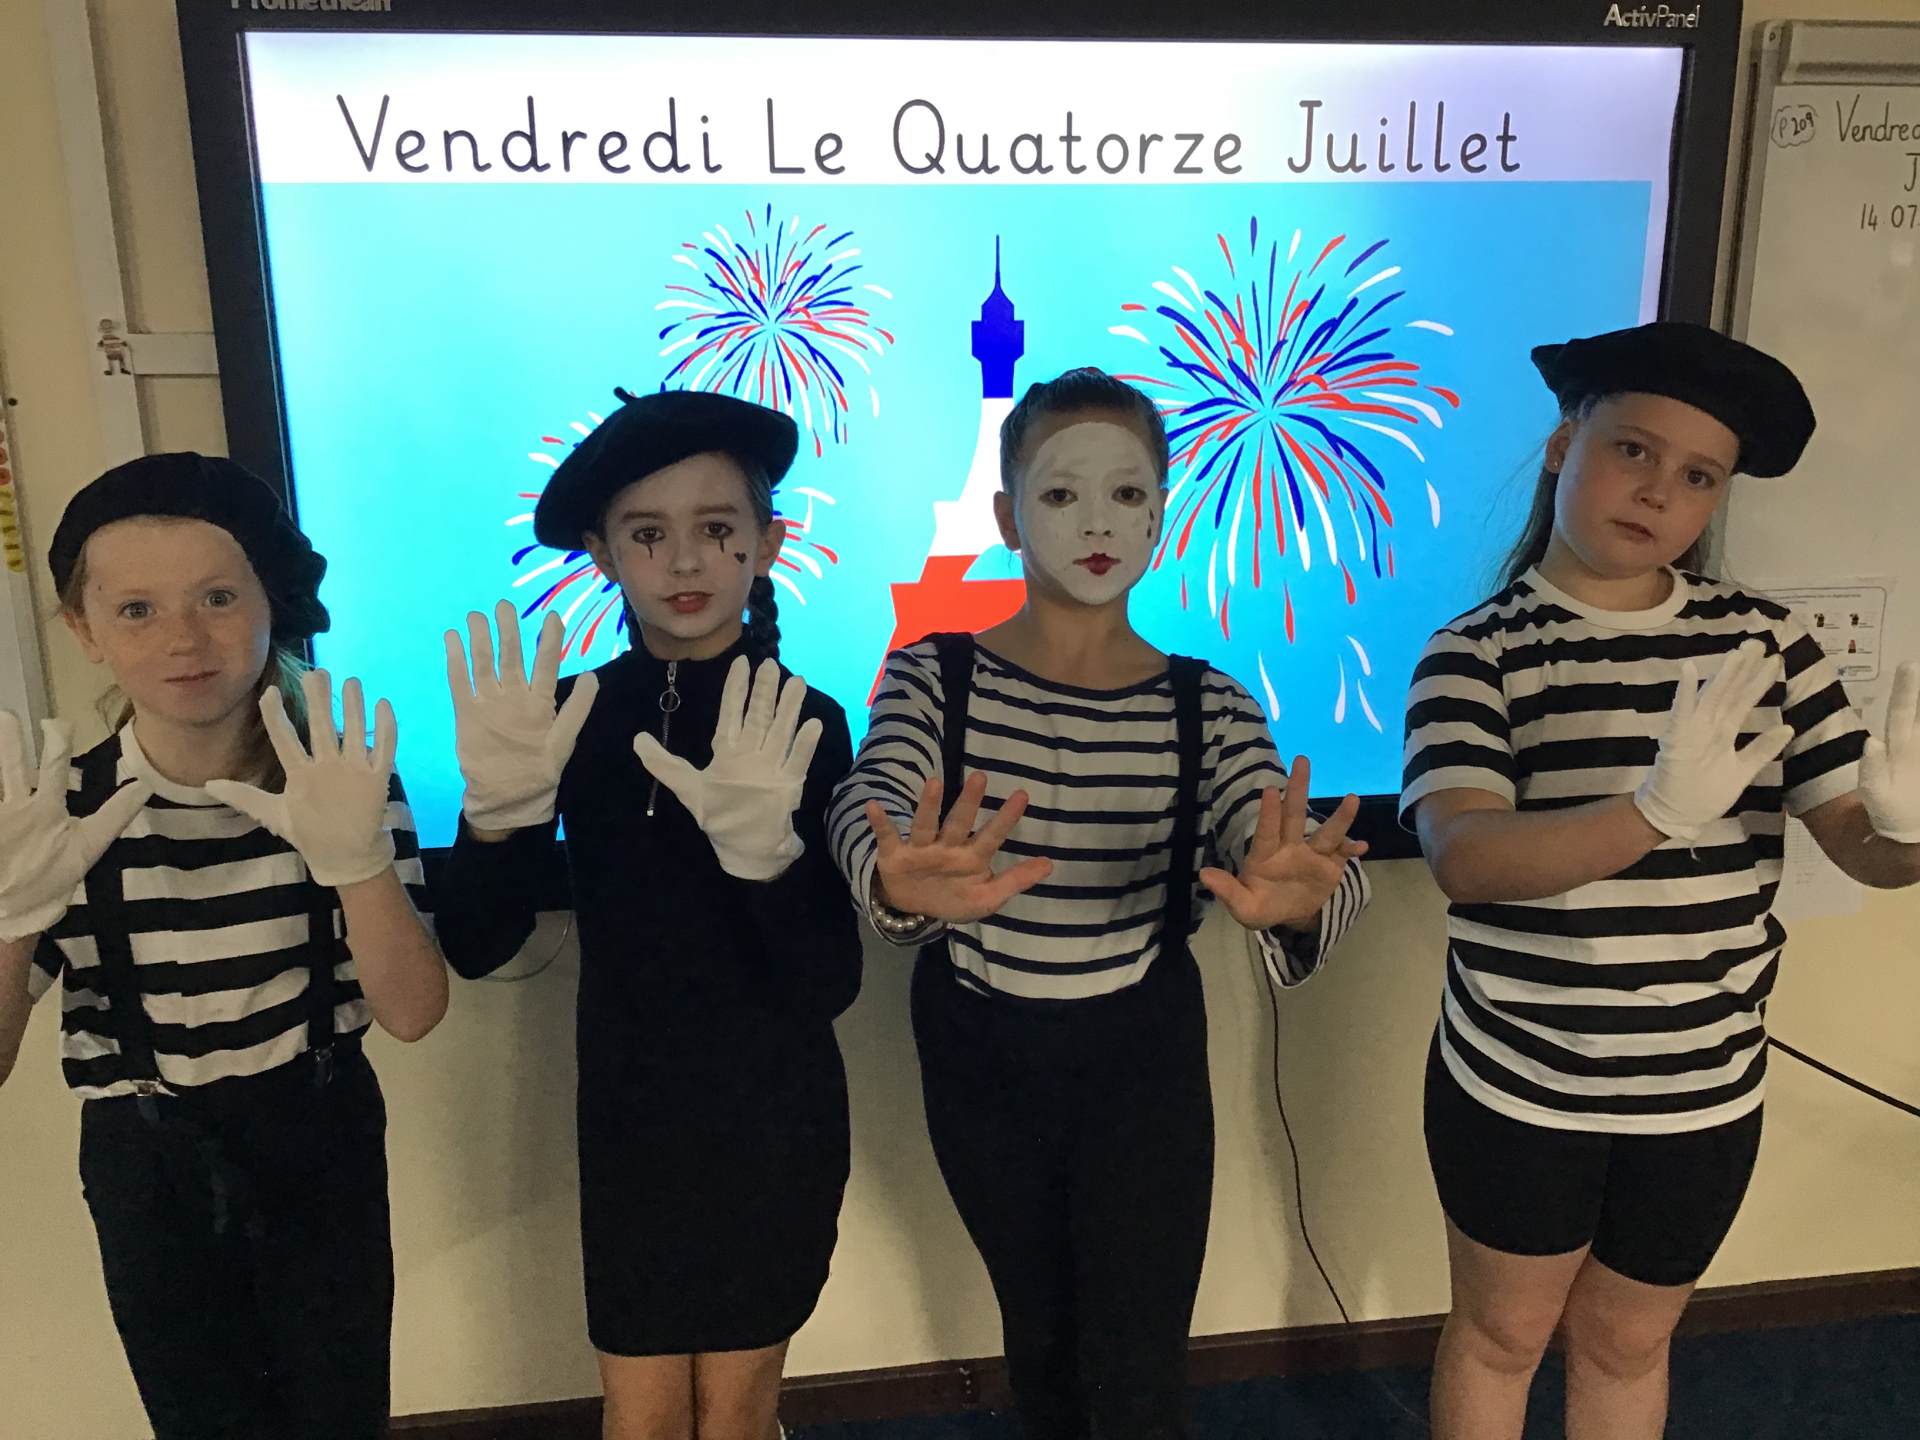 Children dressed as mime artists